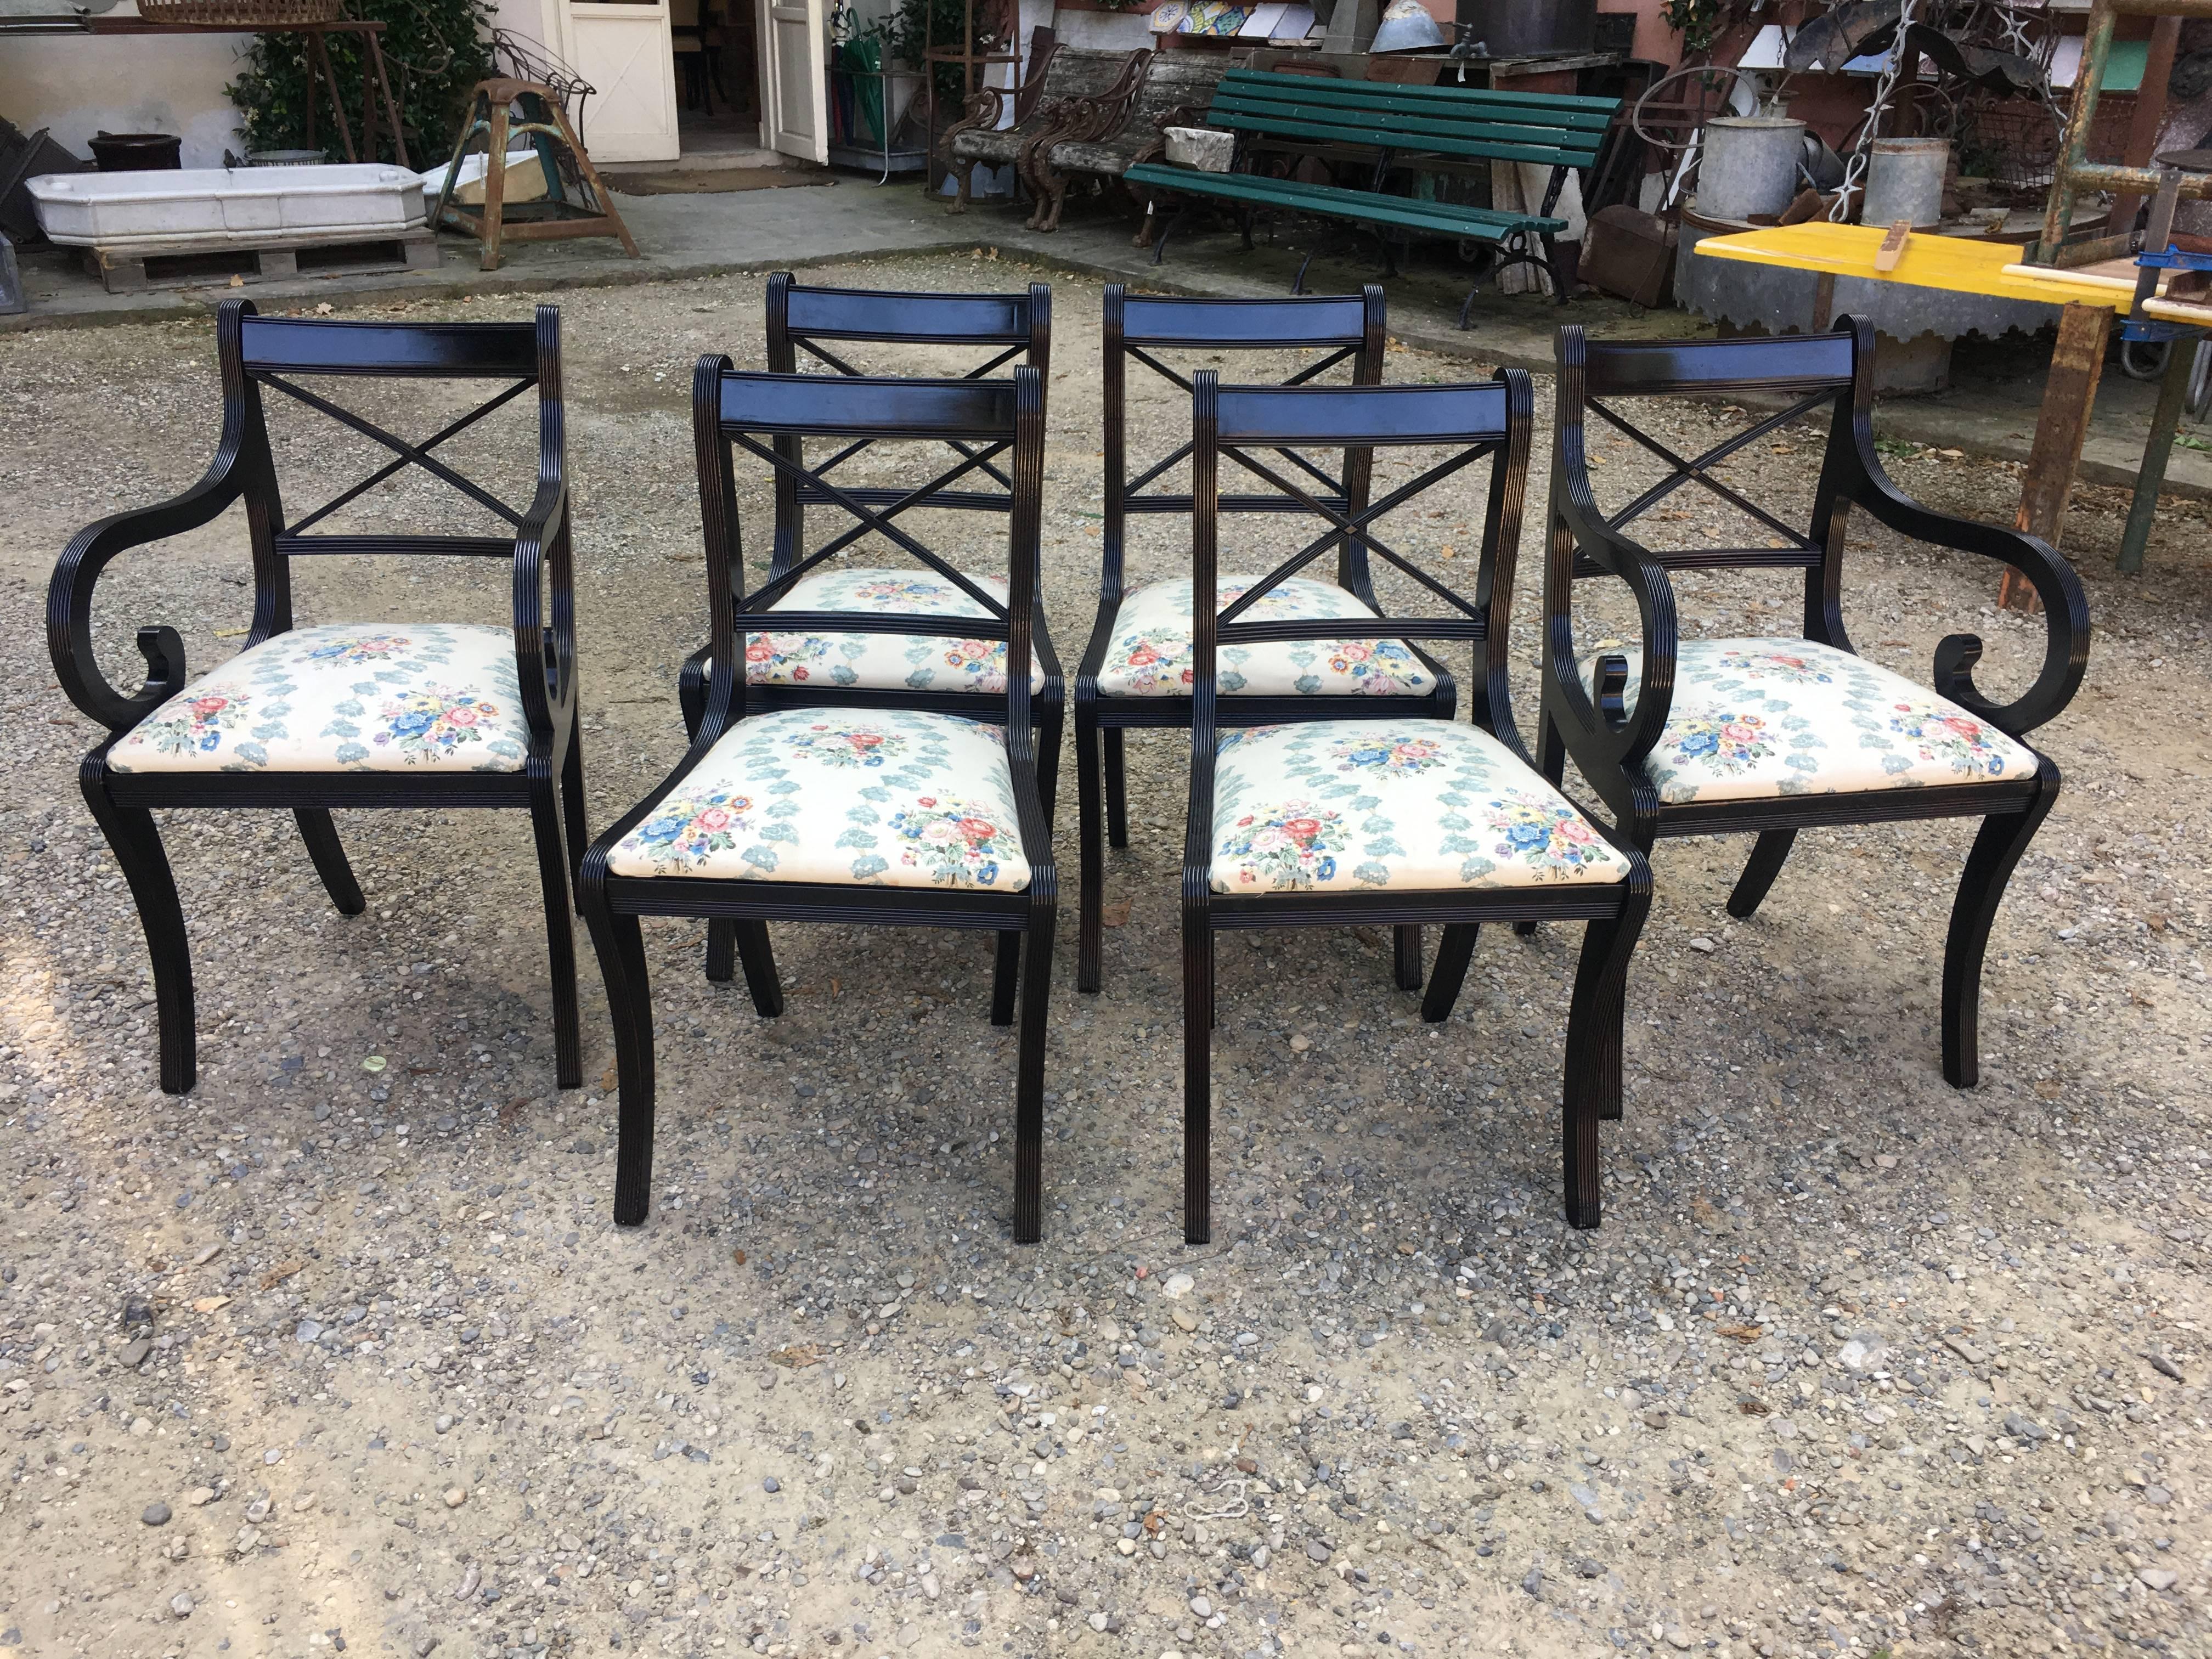 English set of six Regency ebonized chairs with floral fabric seat from 1860s
This set is composed by four chairs and two chairs with armrests.
Armchairs: cm.49 x 52 x H 85 (seat H. cm.48)
Chairs: cm.43 x 49 x H 85 (seat H. cm.48).